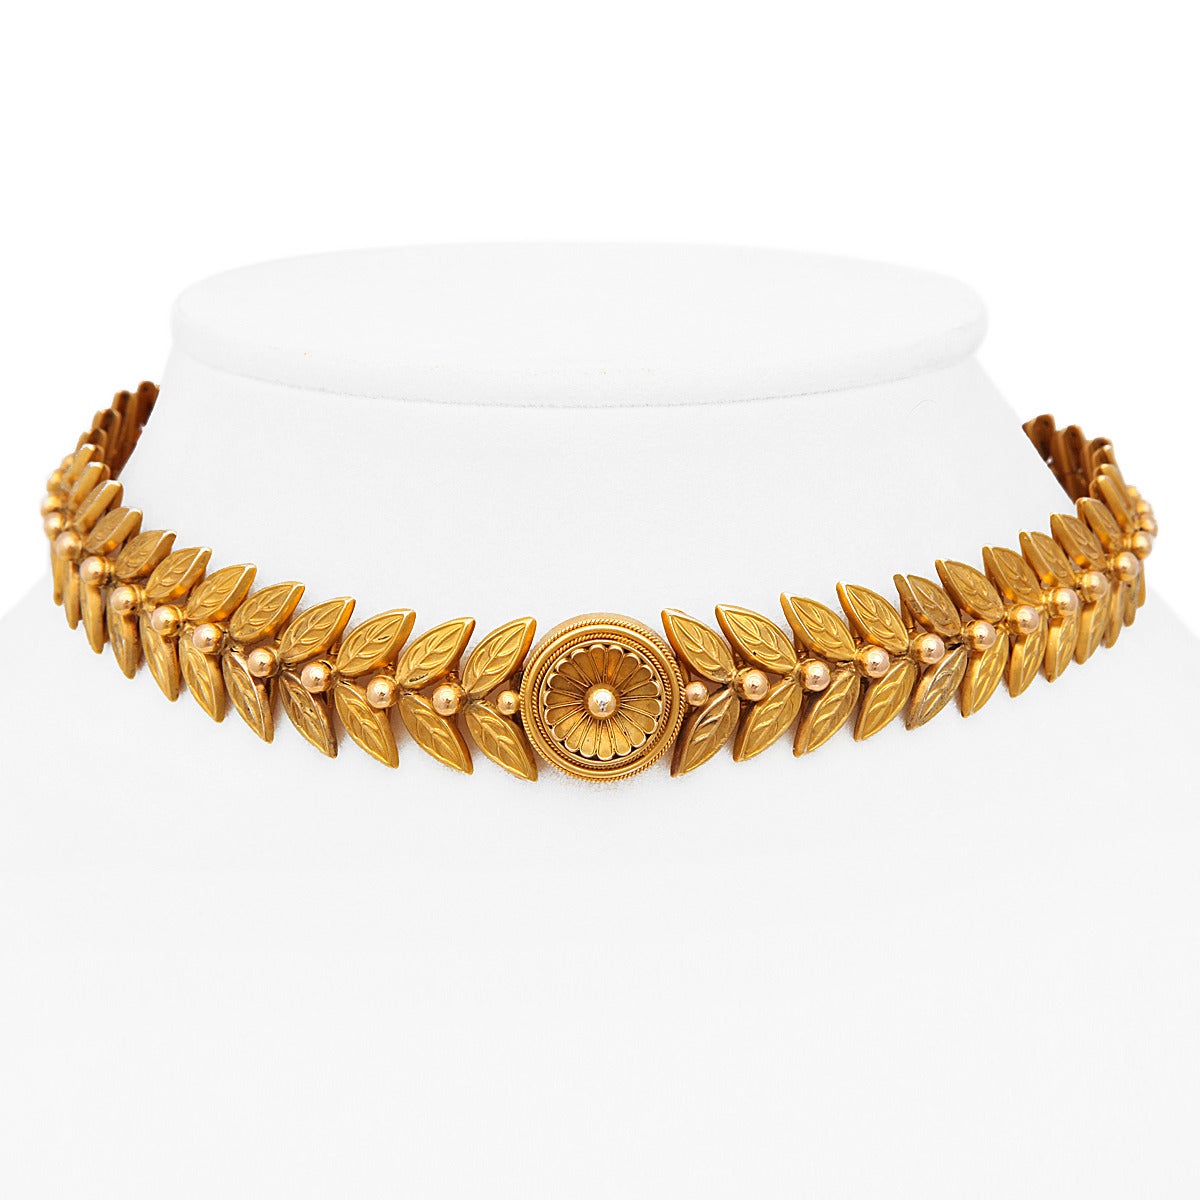 Roman Revival gold leaf-form choker ornamented with a central floral medallion.

English, ca. 1885.
Length: 13 1/2 inches